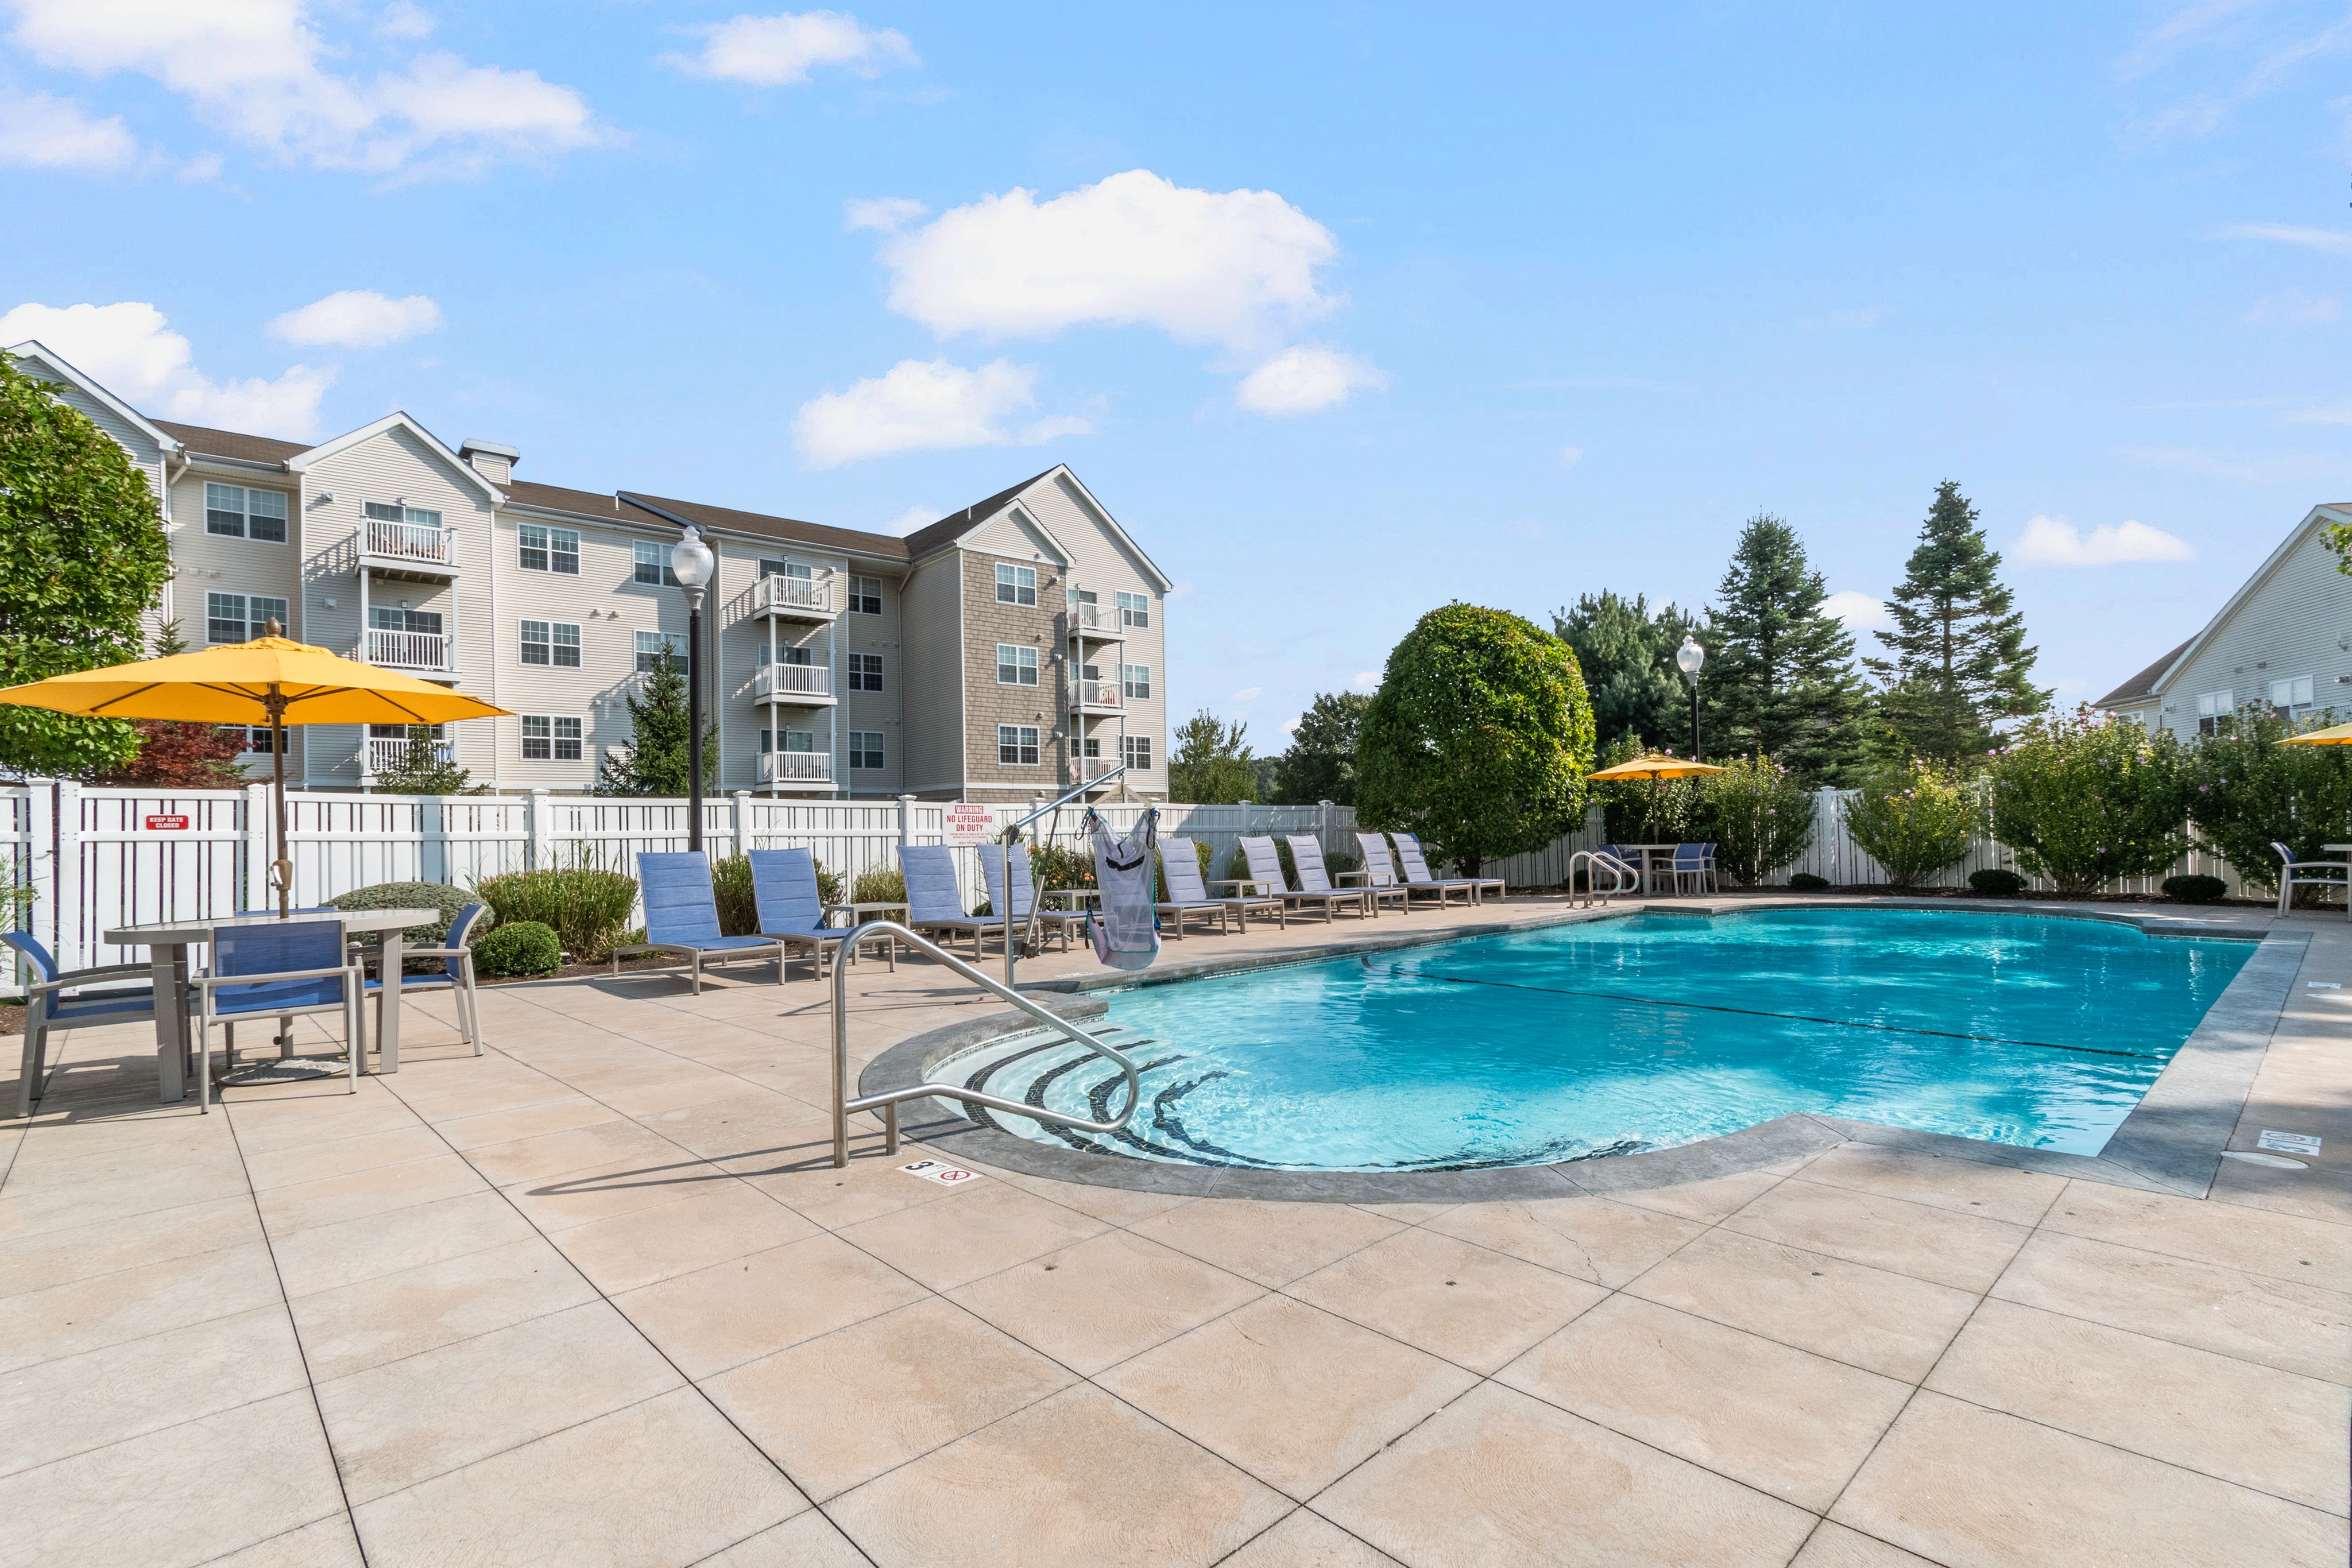 Swimming Pool | Apartment Homes in Cranston, RI | Independence Place